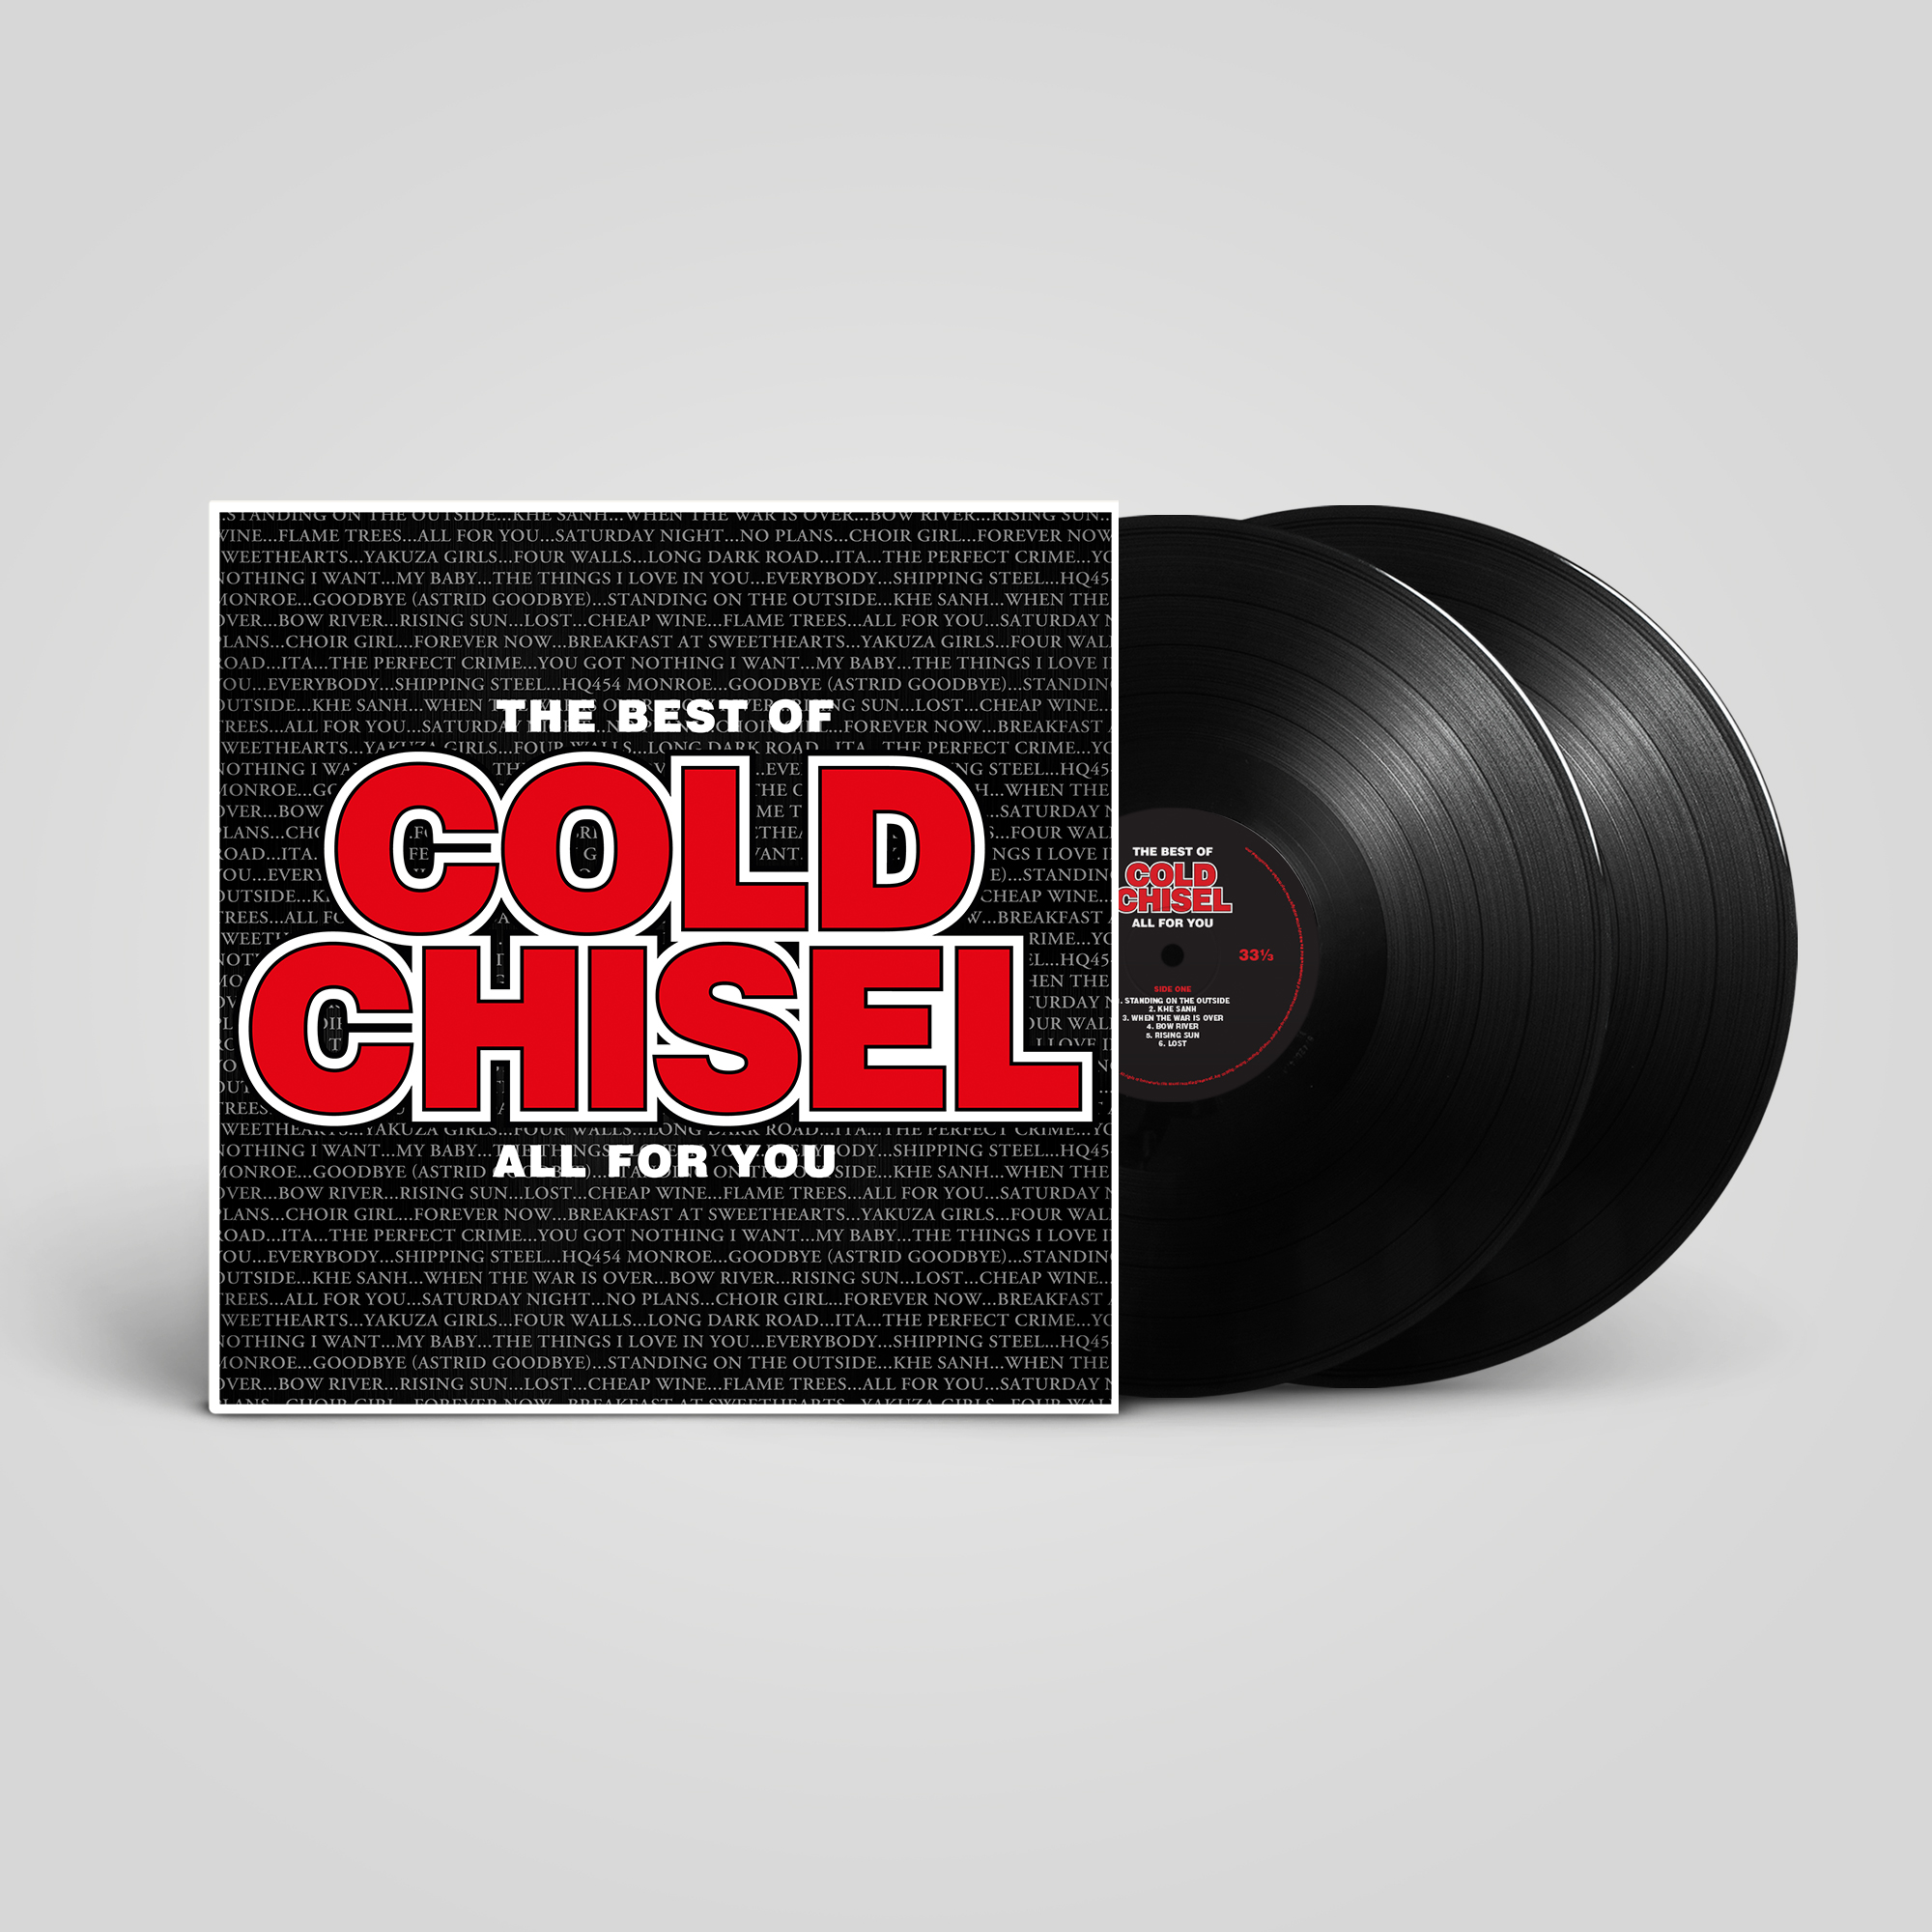 New, Expanded COLD CHISEL Best Of. On VINYL for first time!